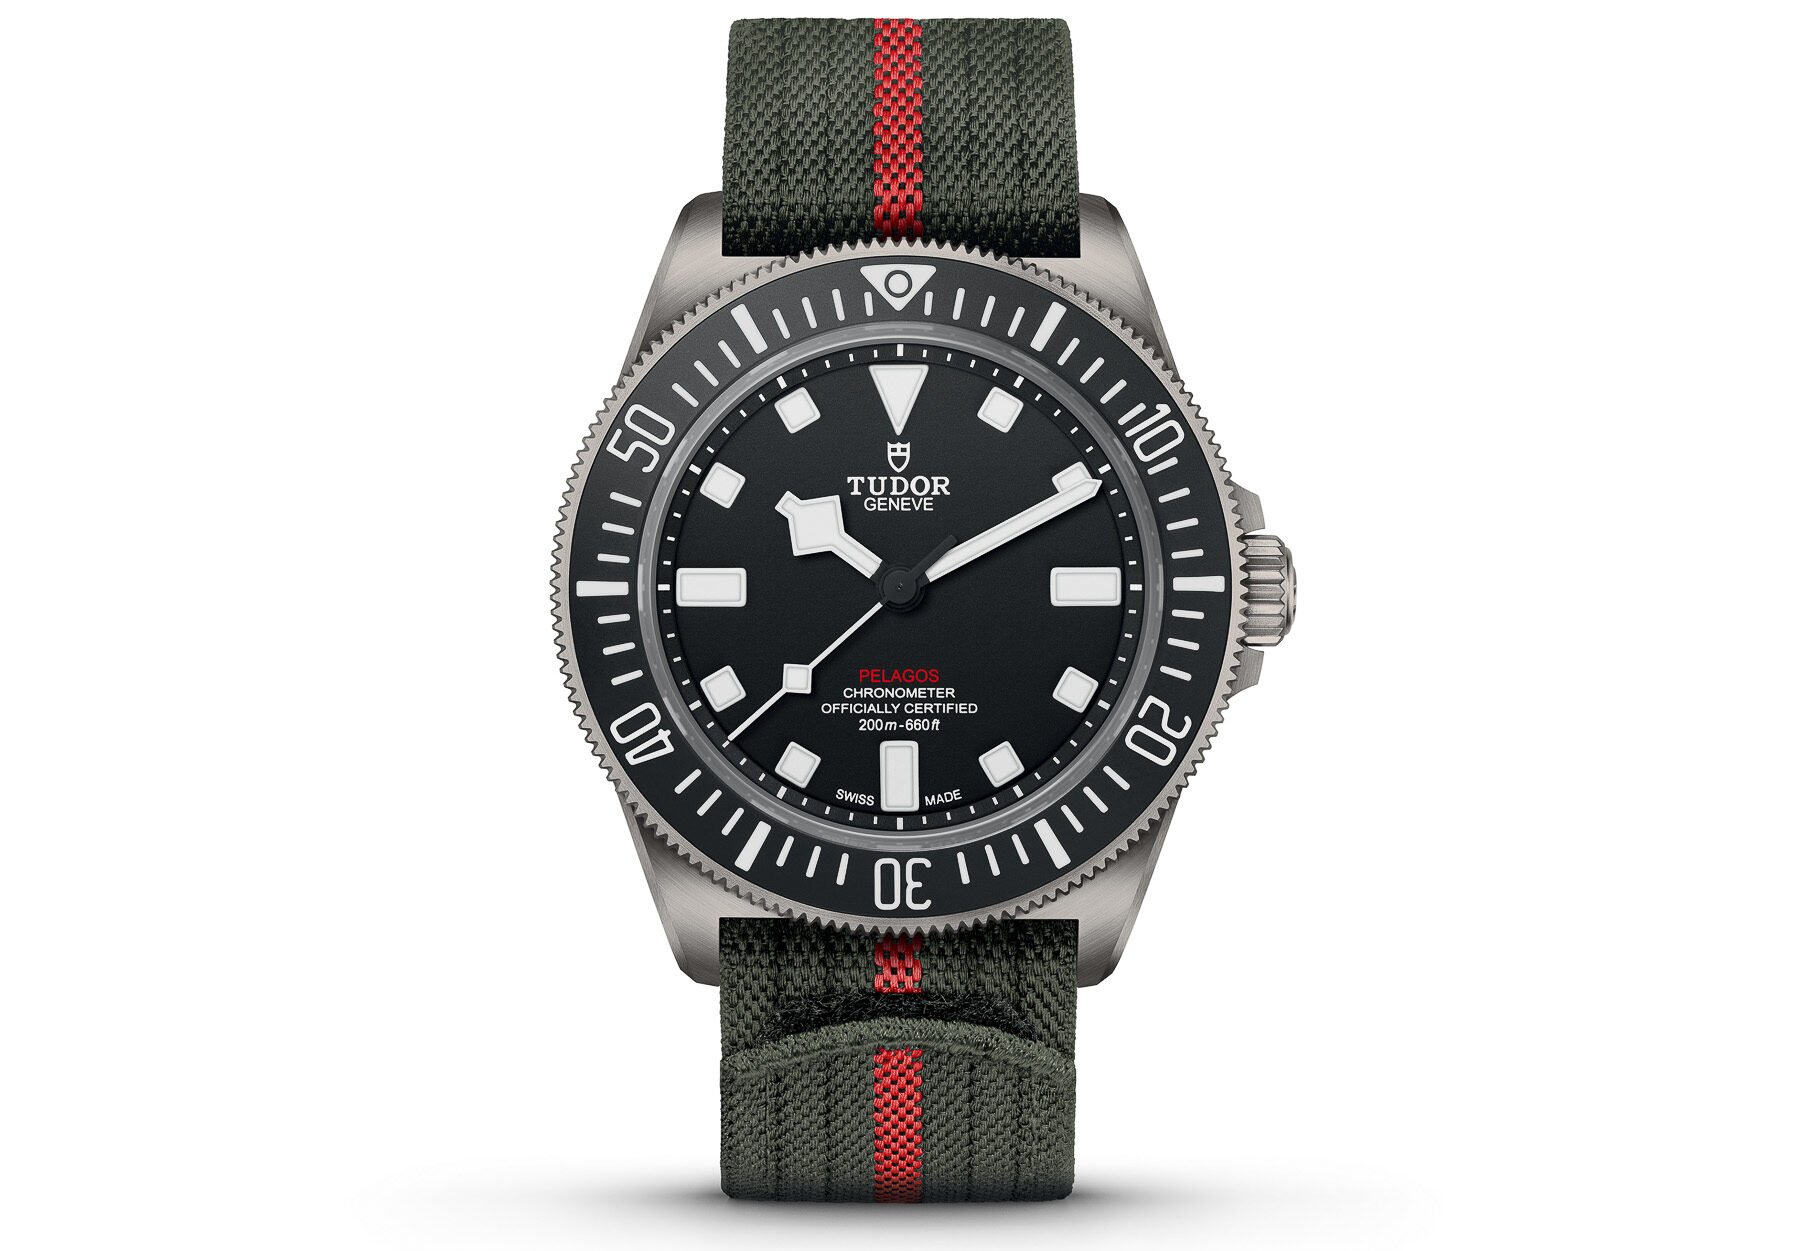 My 2021 Watch — A Love Song to the Tudor Pelagos FXD - Revolution Watch